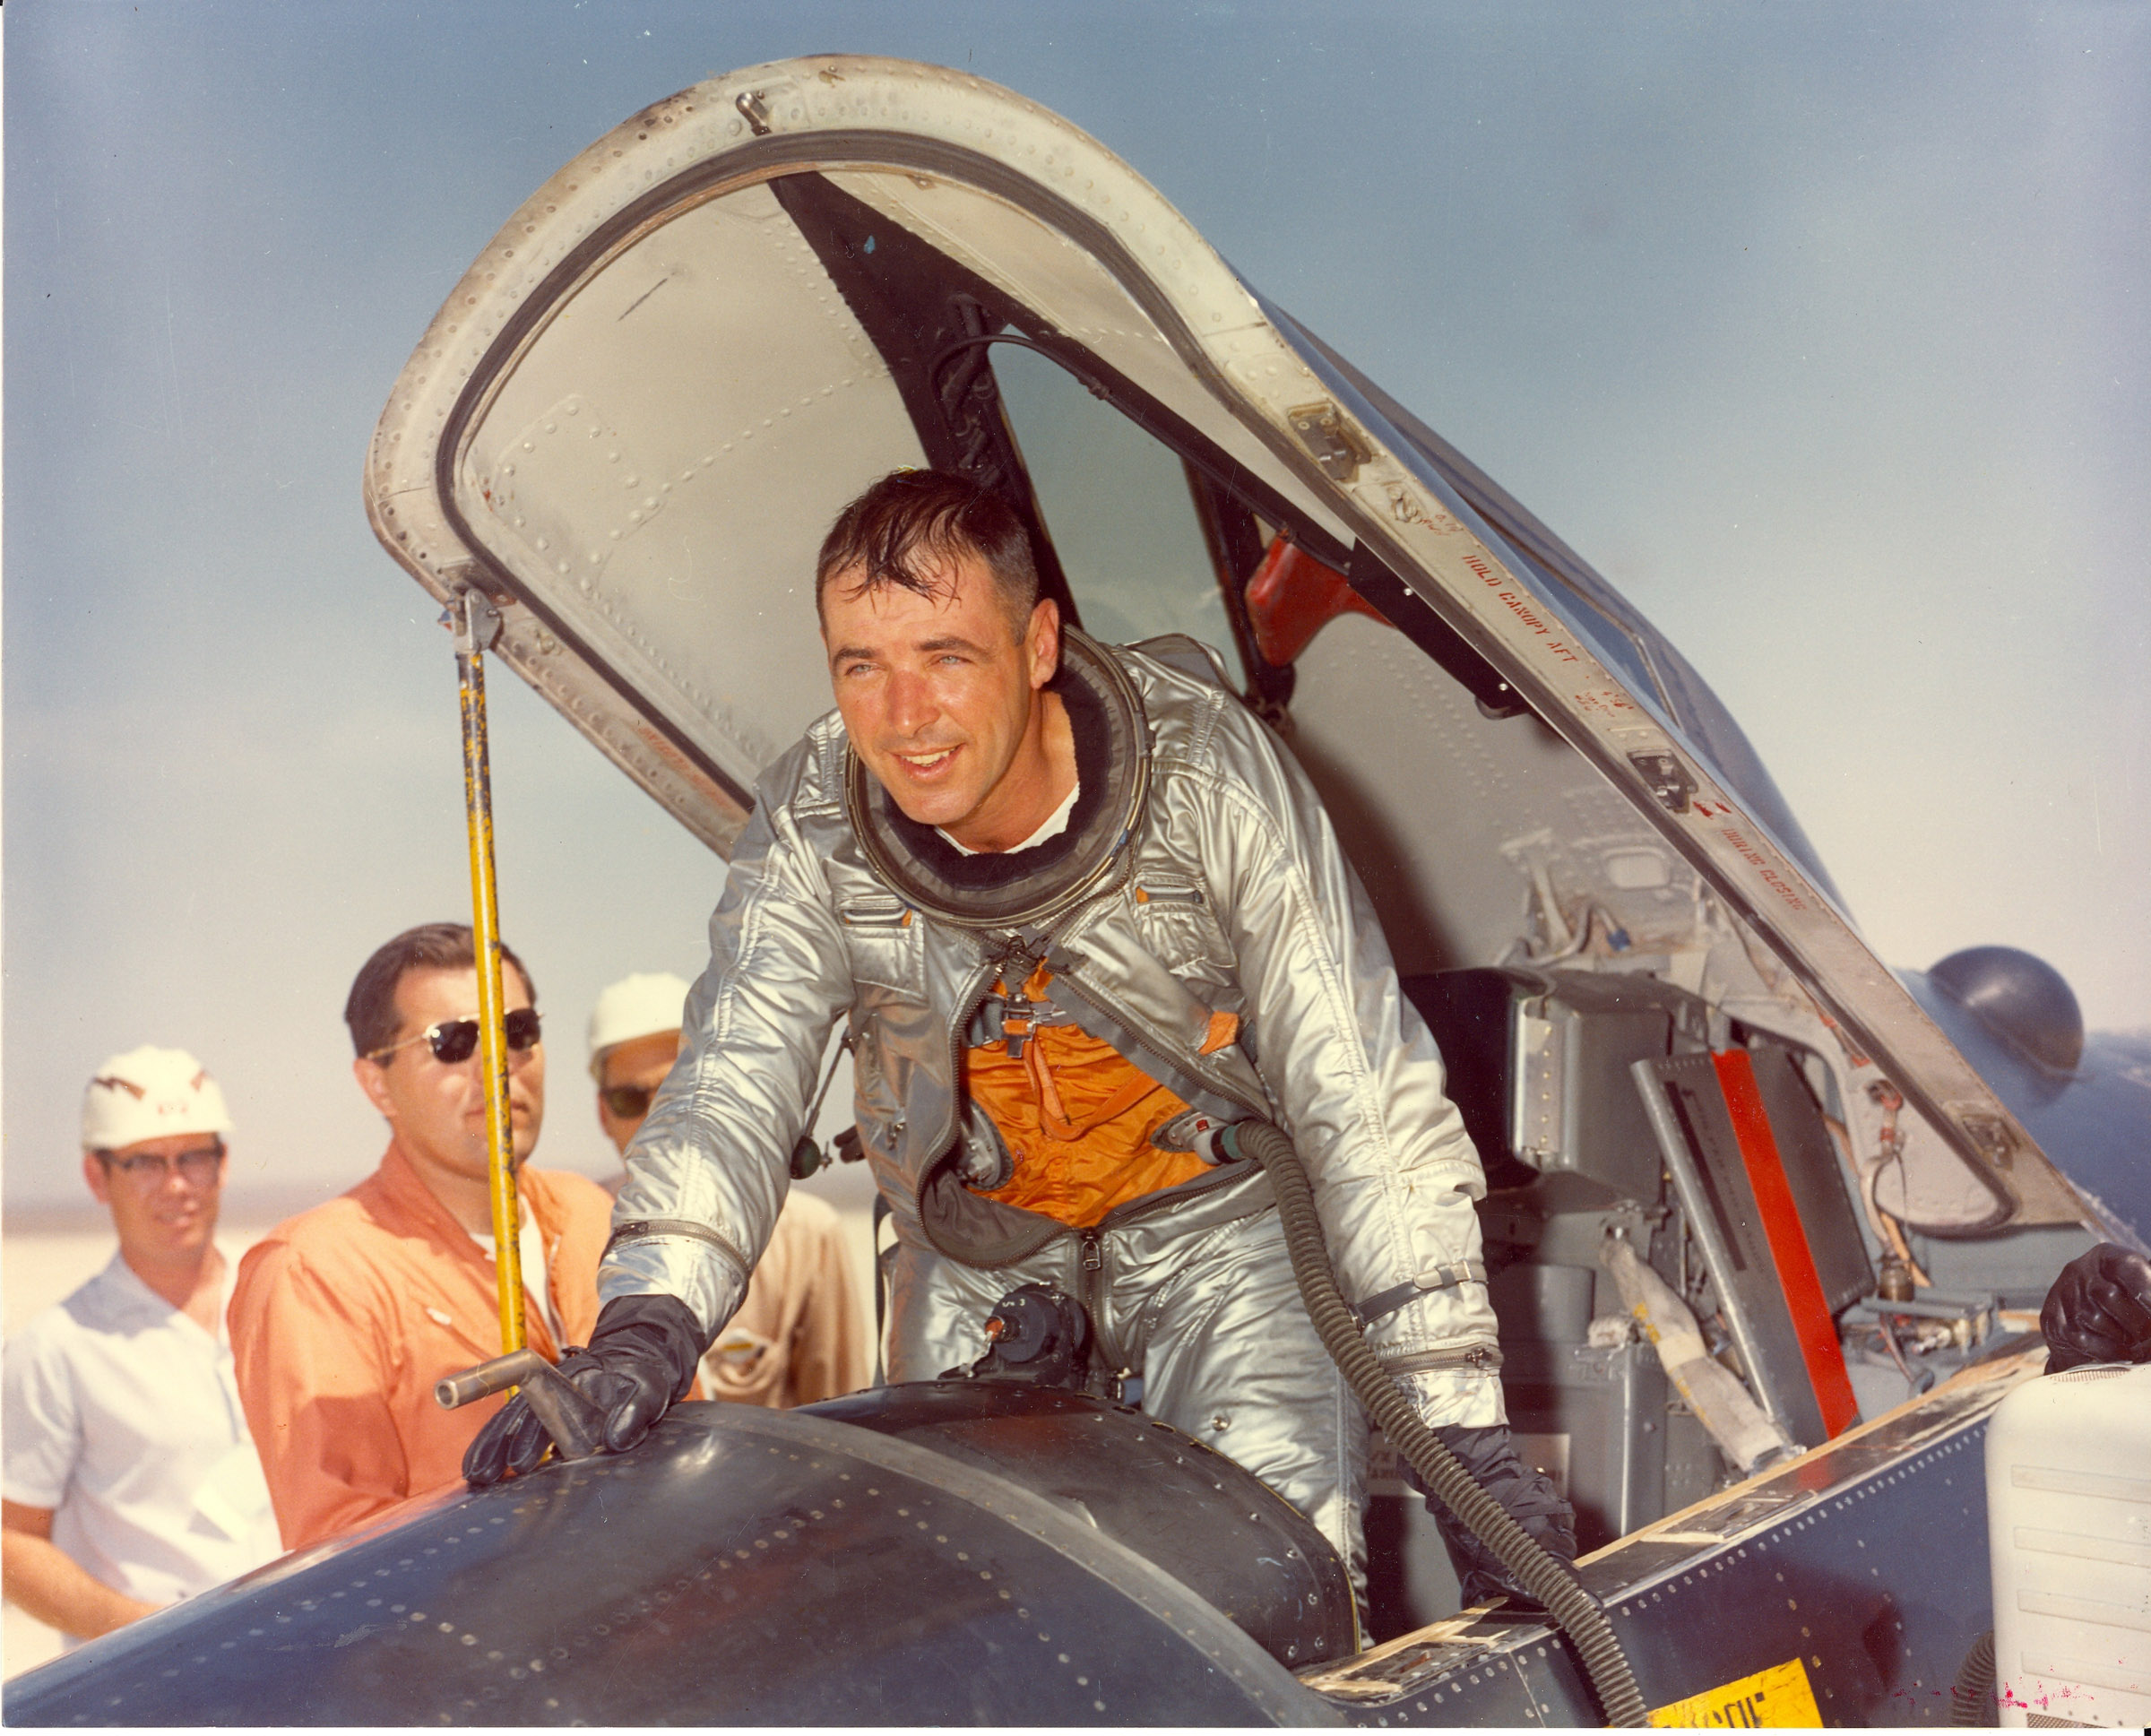 Major Robert M. White was the first pilot to exceed Mach 4, Mach 5, and on 9 November 1961, he flew to Mach 6.04. (NASA)